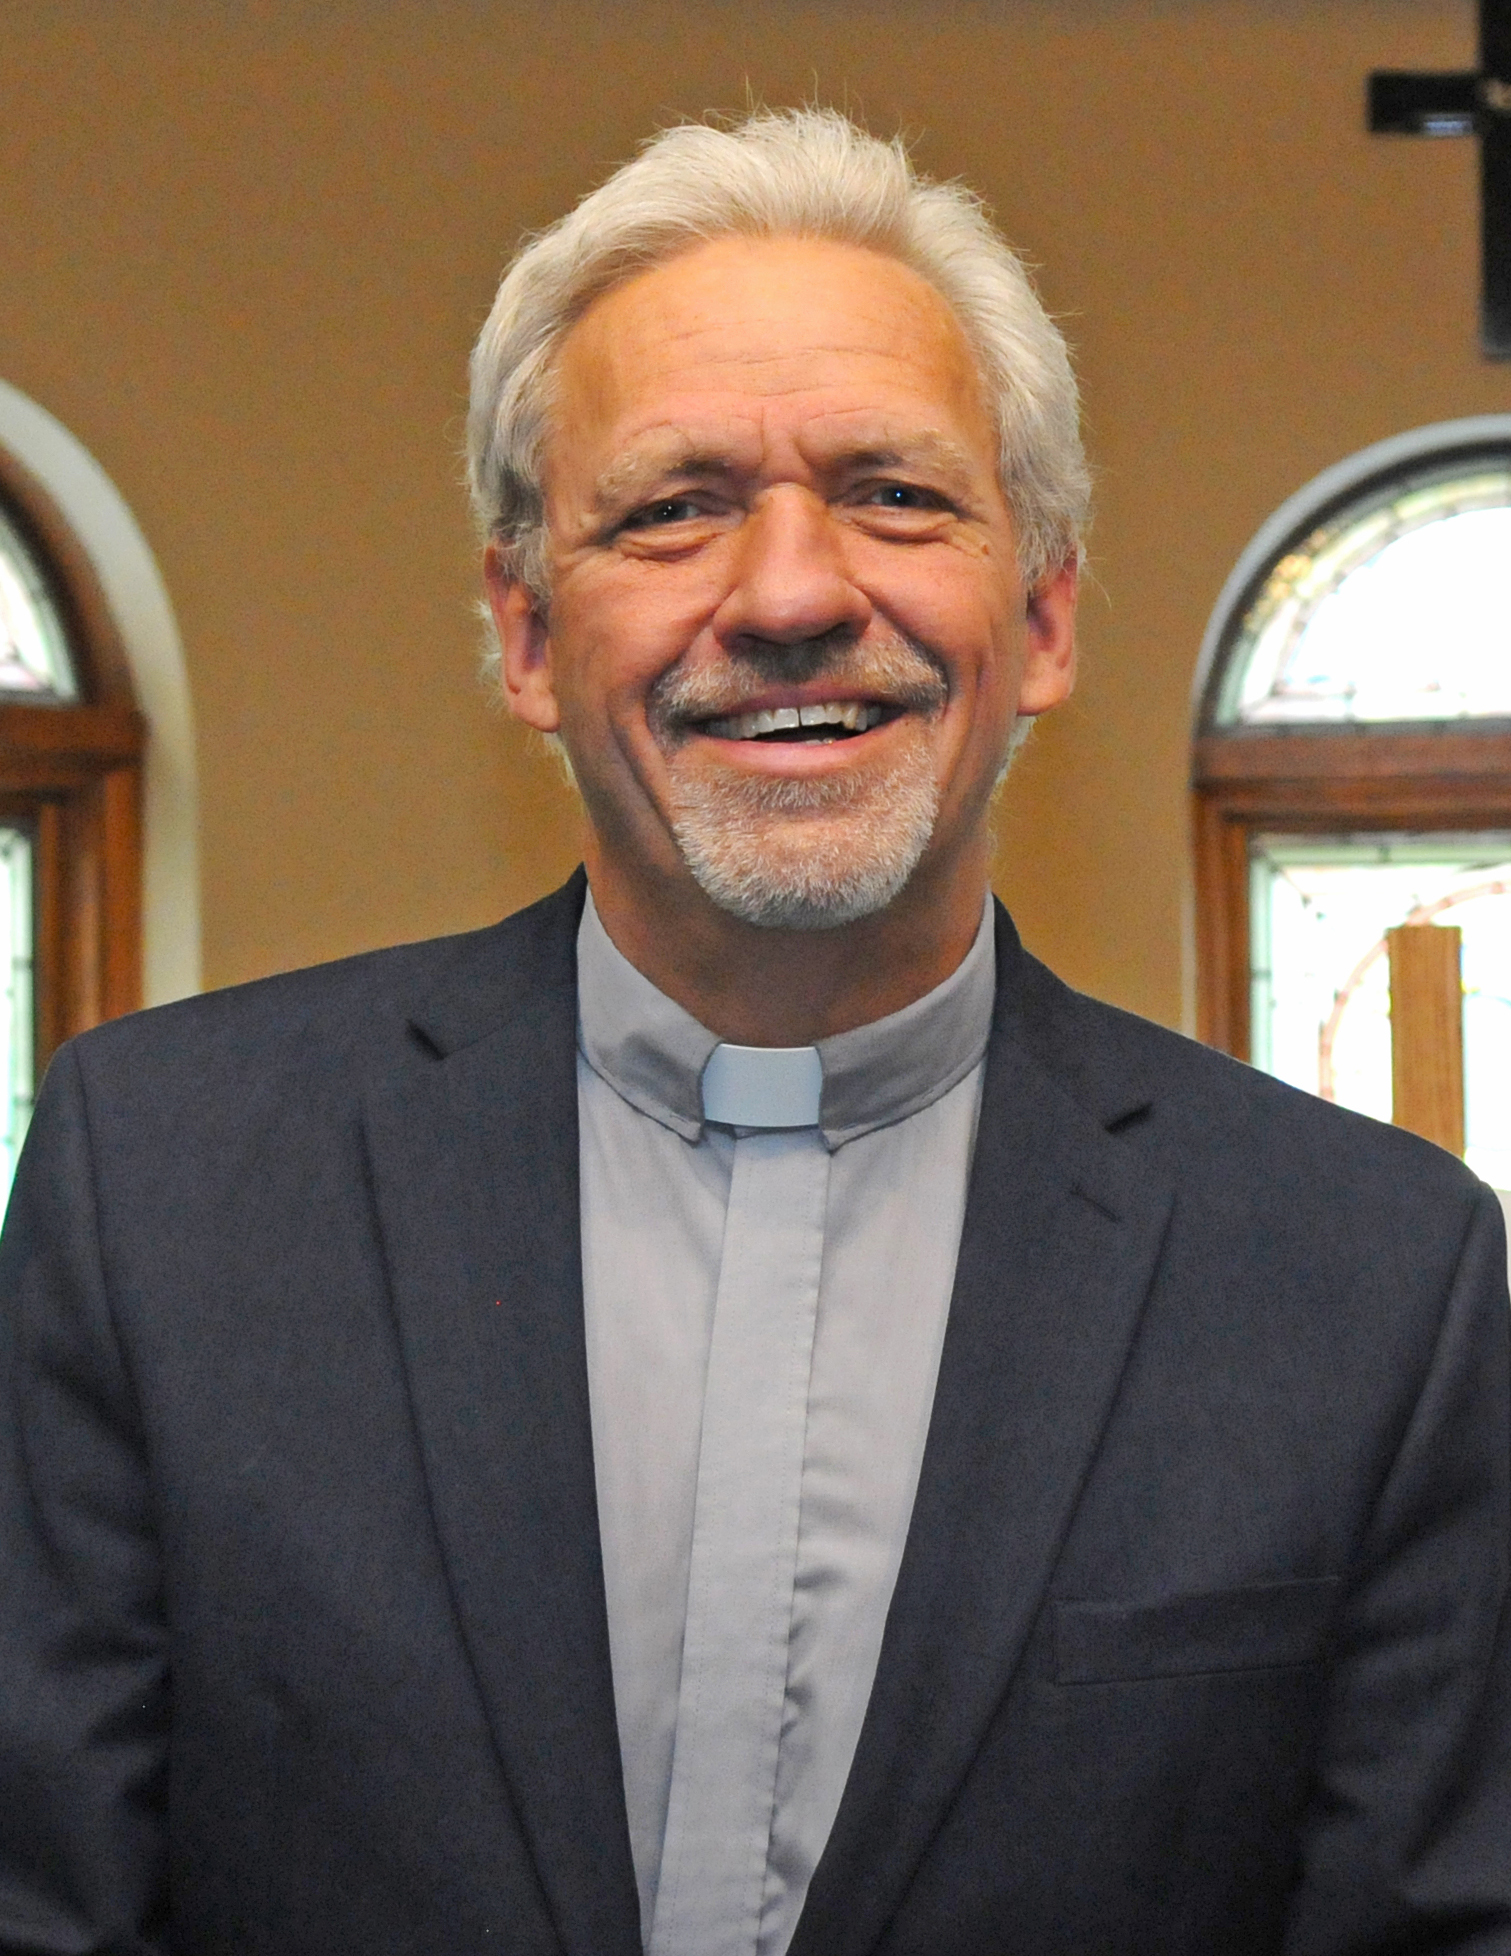 Image of Pastor Genter from Concordia's chaplaincy team